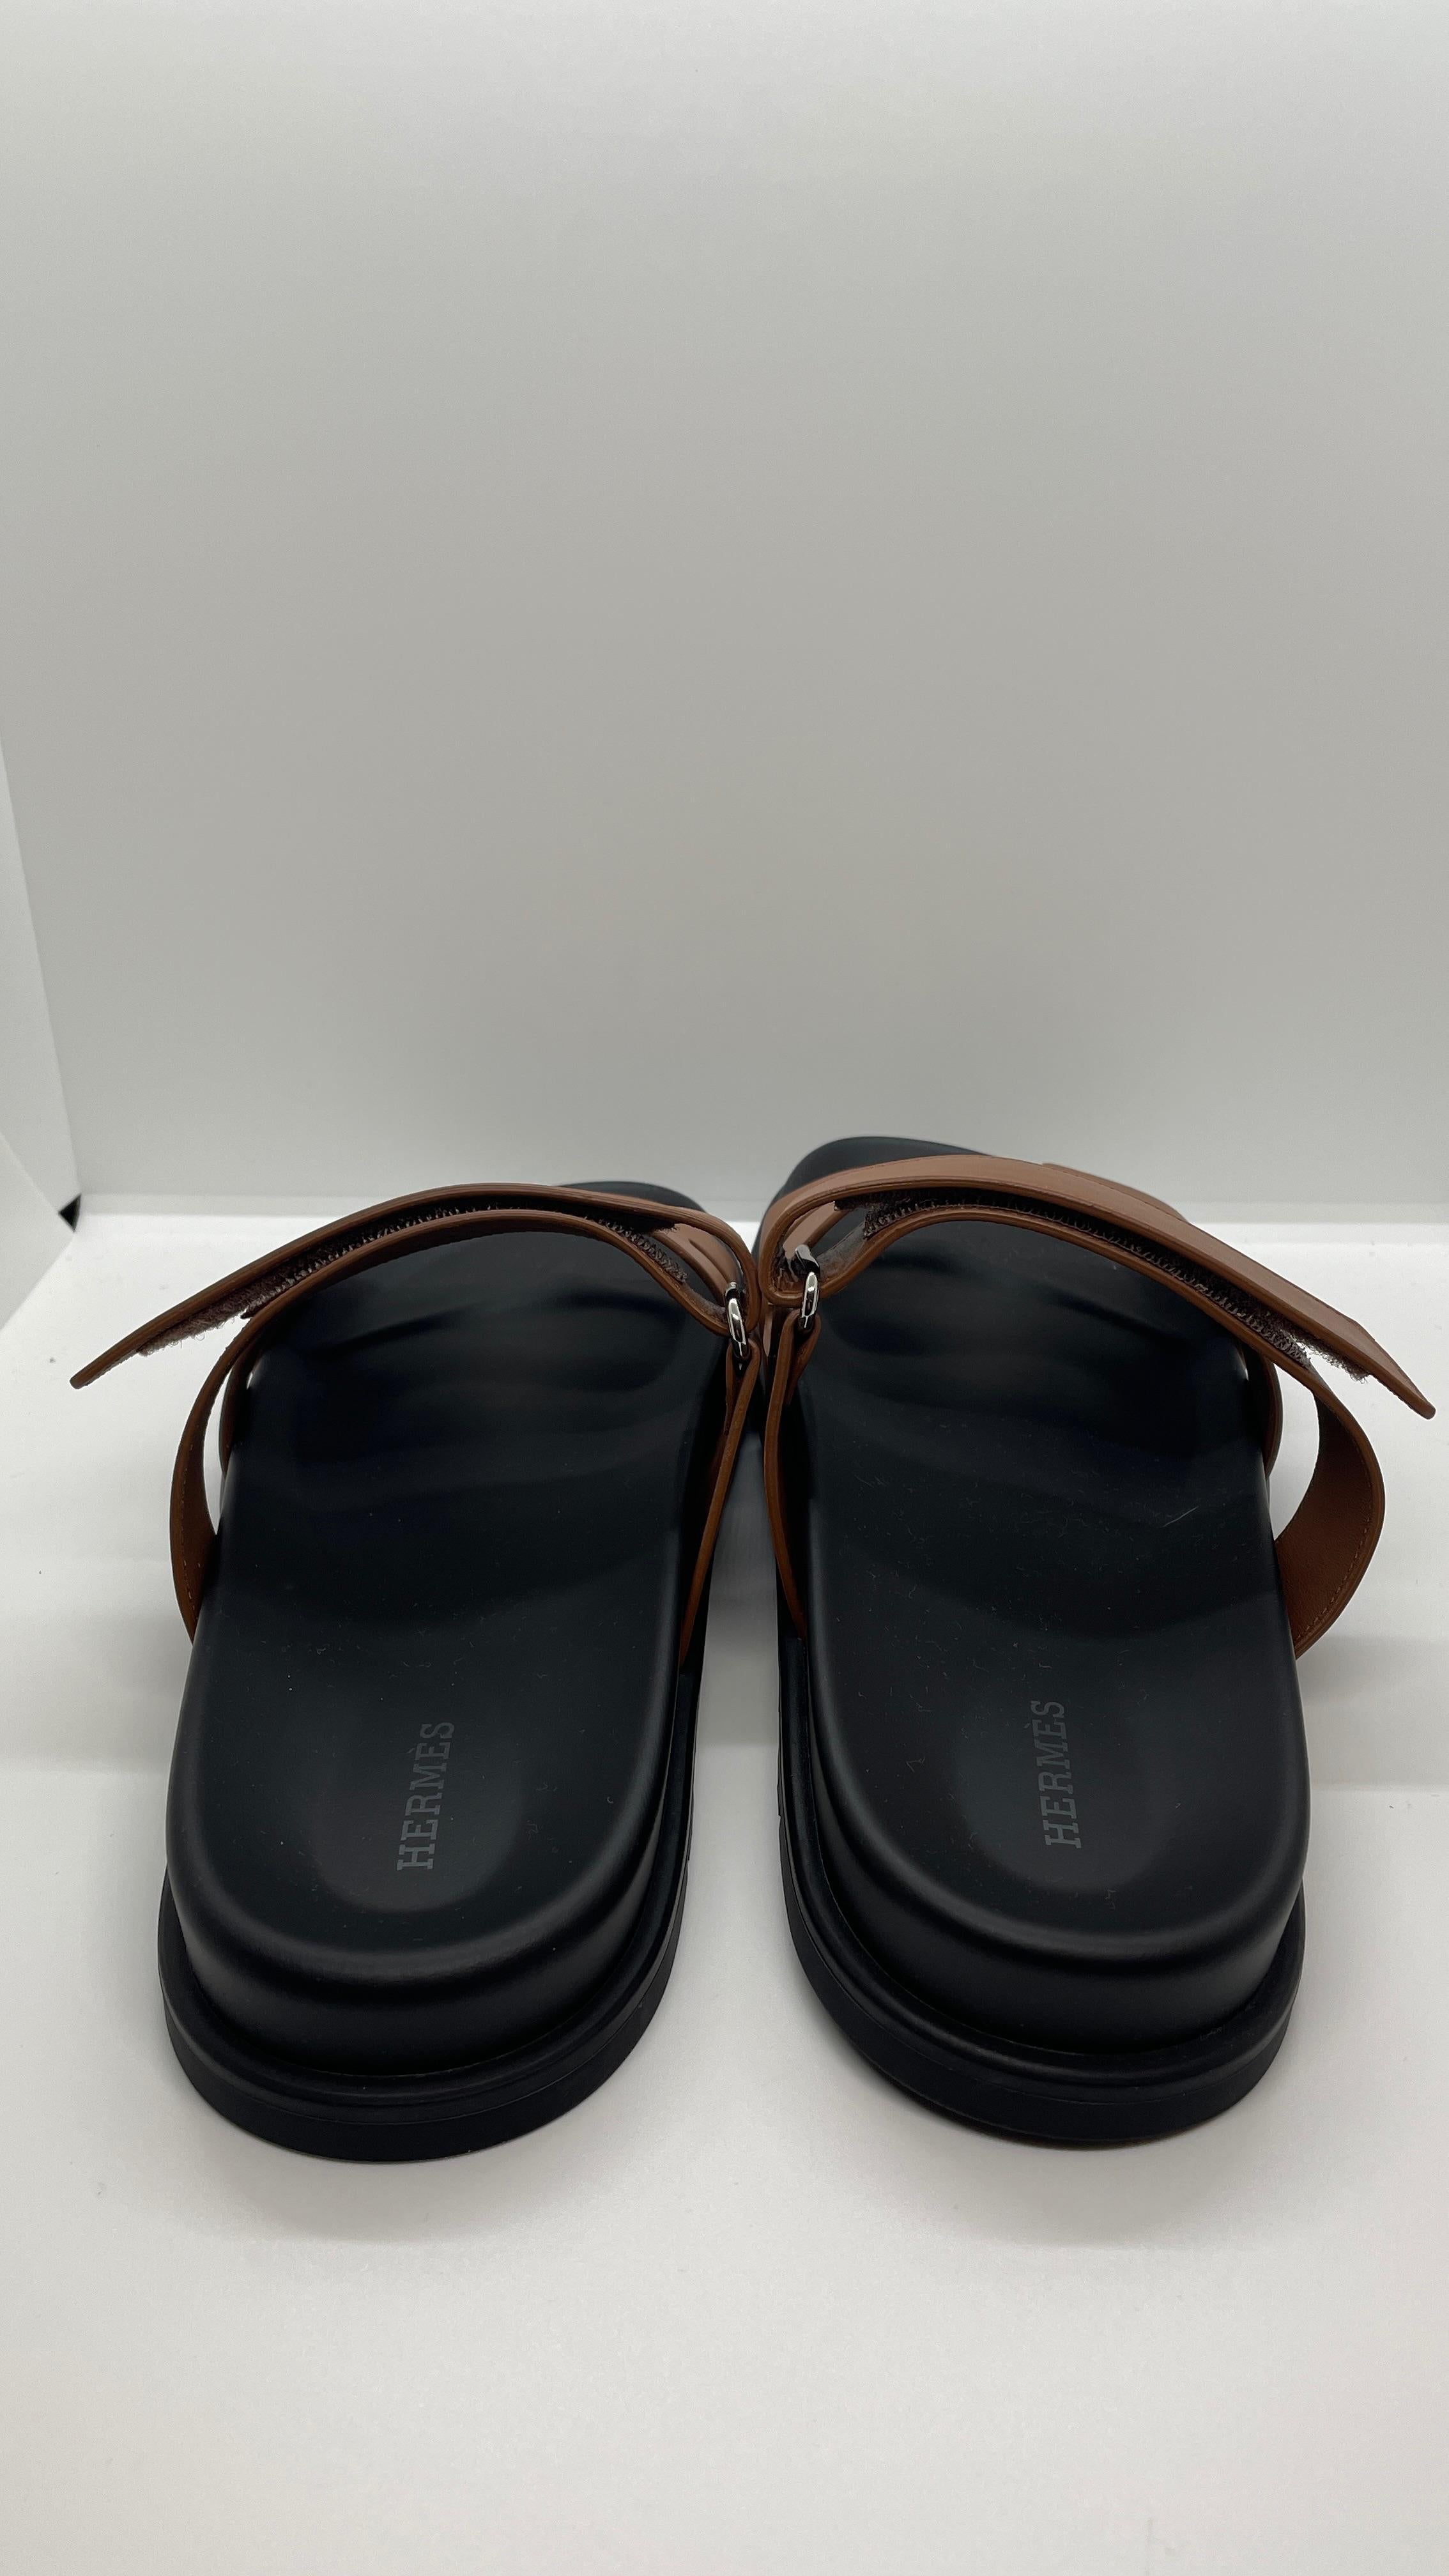 MOST WANTED SANDALS CHYPRE SANDALS  ( unisex) 

NEVER WORN ITEM 
SOLD OUT EVERYWHERE!!!  Size 44 available.

LEATHER BLACK WITH GOLD 

PERFECT FOR STREET OR BEACH OUTWEAR 

INCLUDES; SHOPPING BAG / RIBBON / DUST BAG/ COPY ORIGINAL INVOICE 
